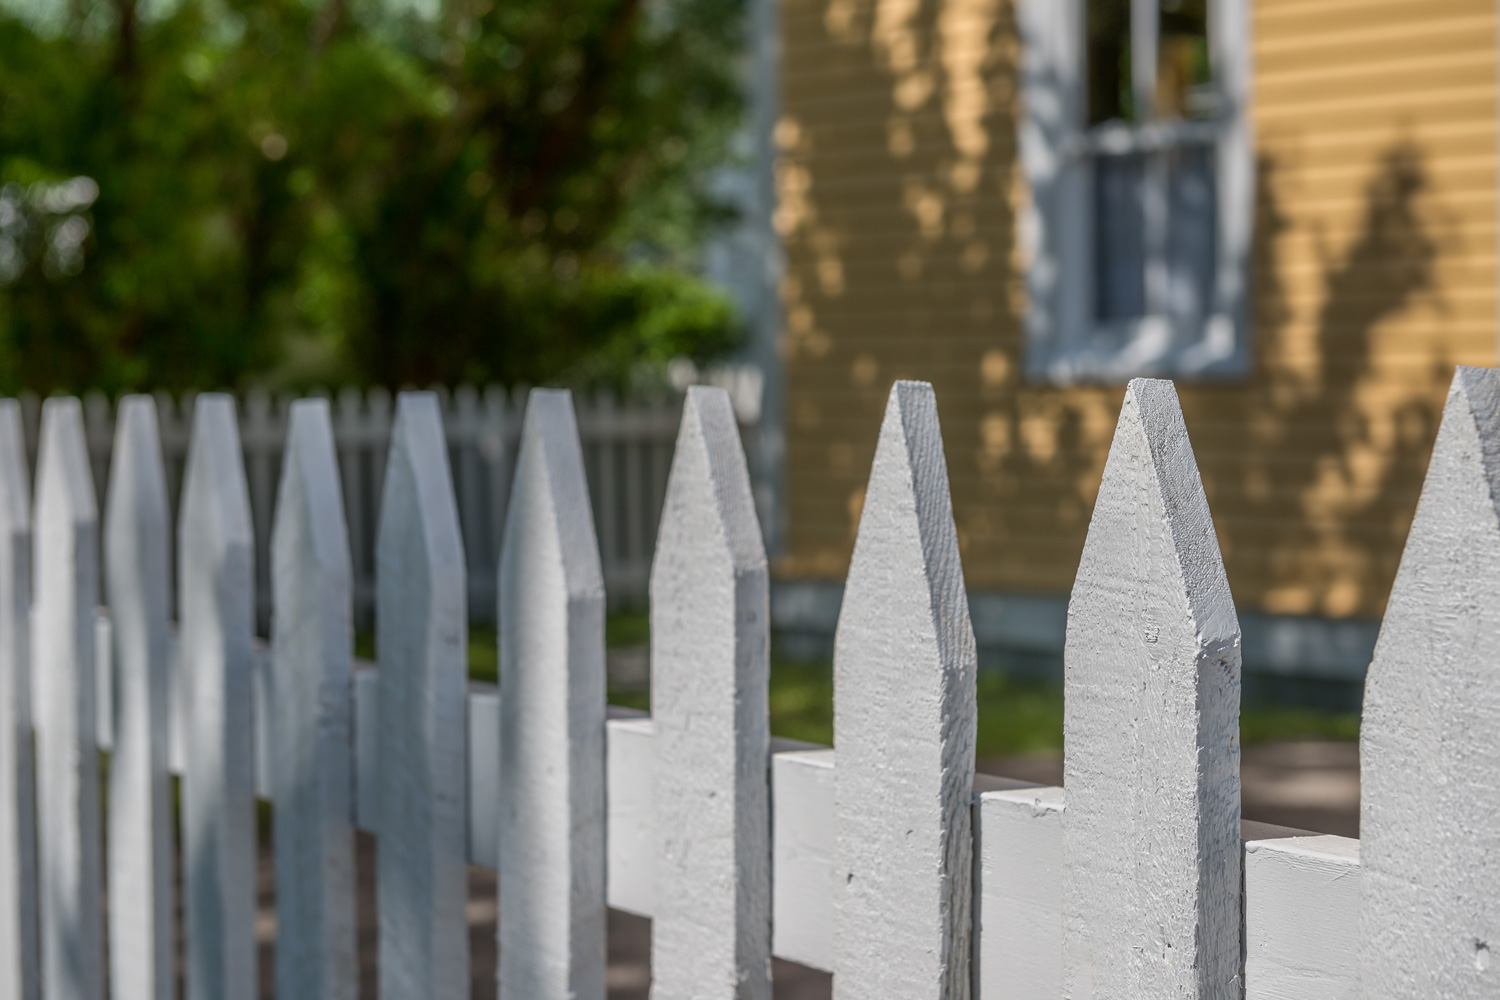 A white picket fence with a horizontal wooden rail. There's a yellow clapboard house with a white vertical window in the background.